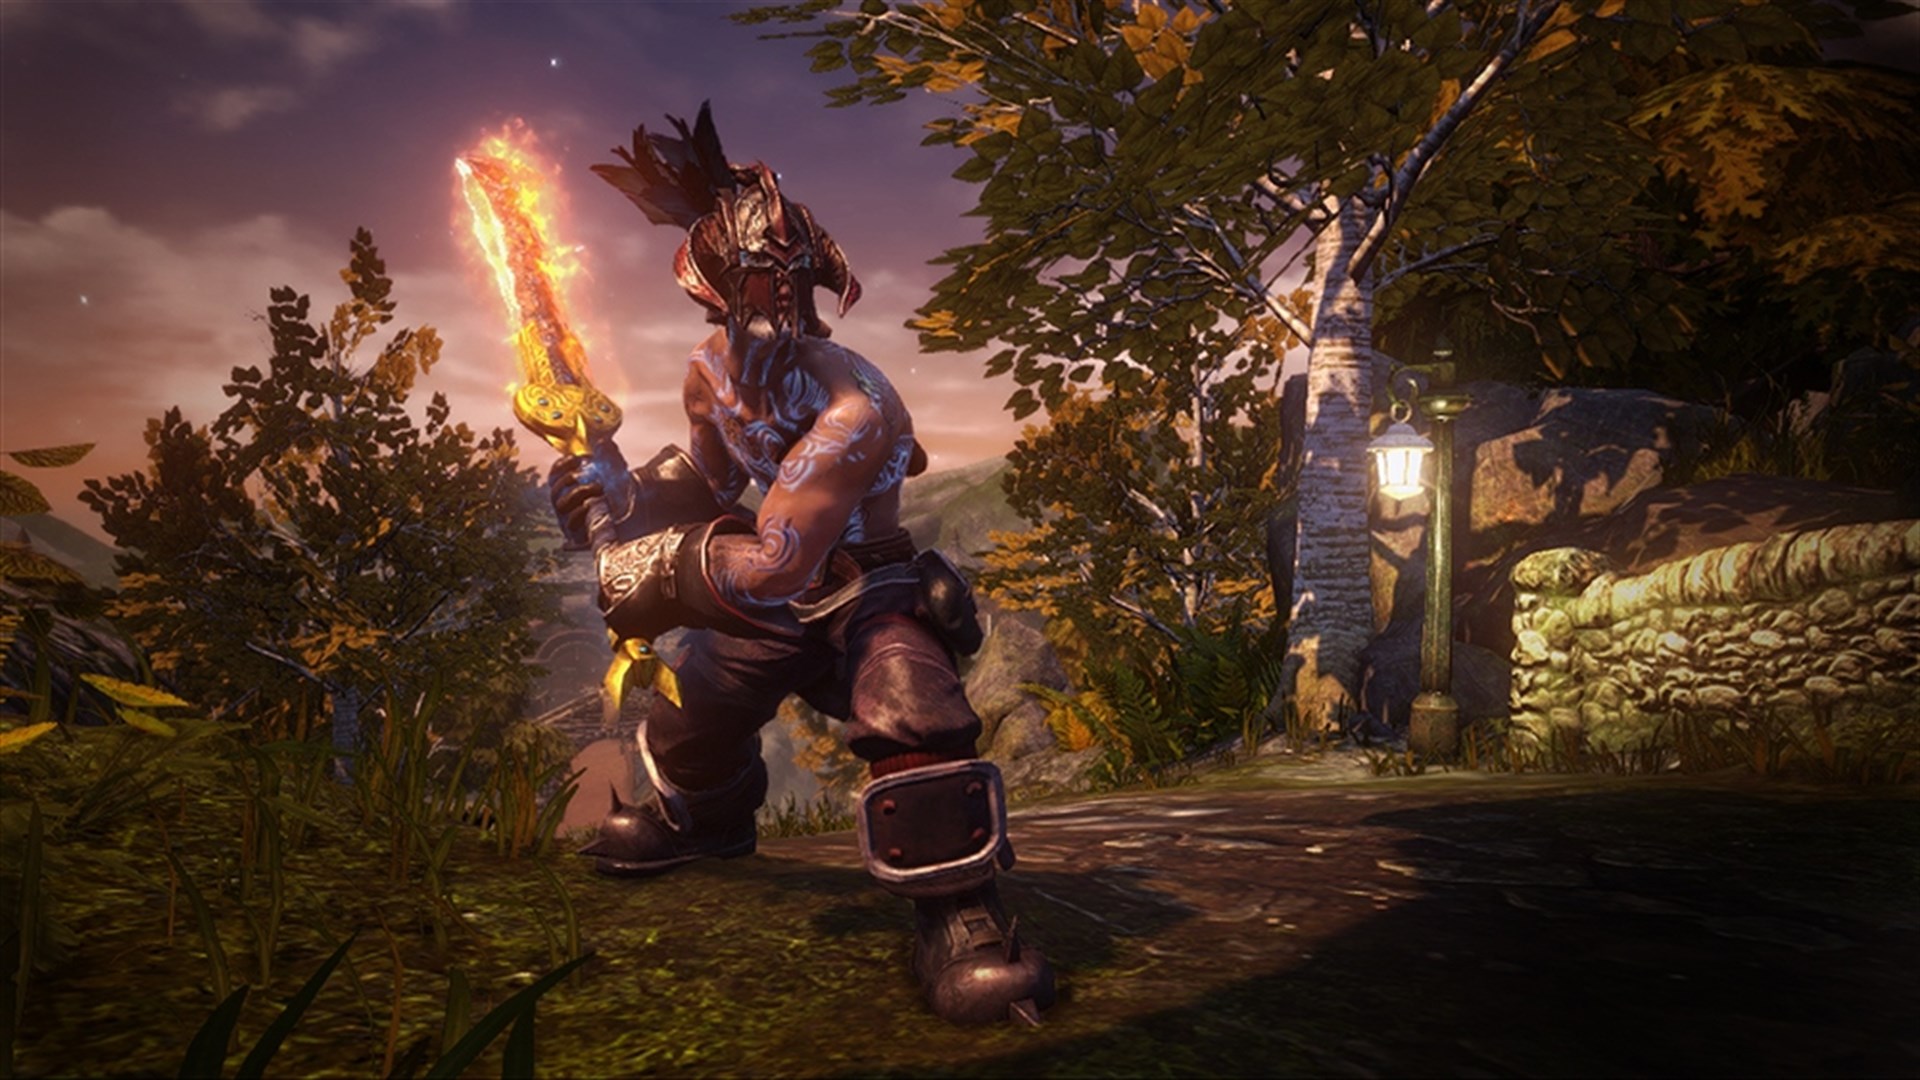 Fable is a classic RPG